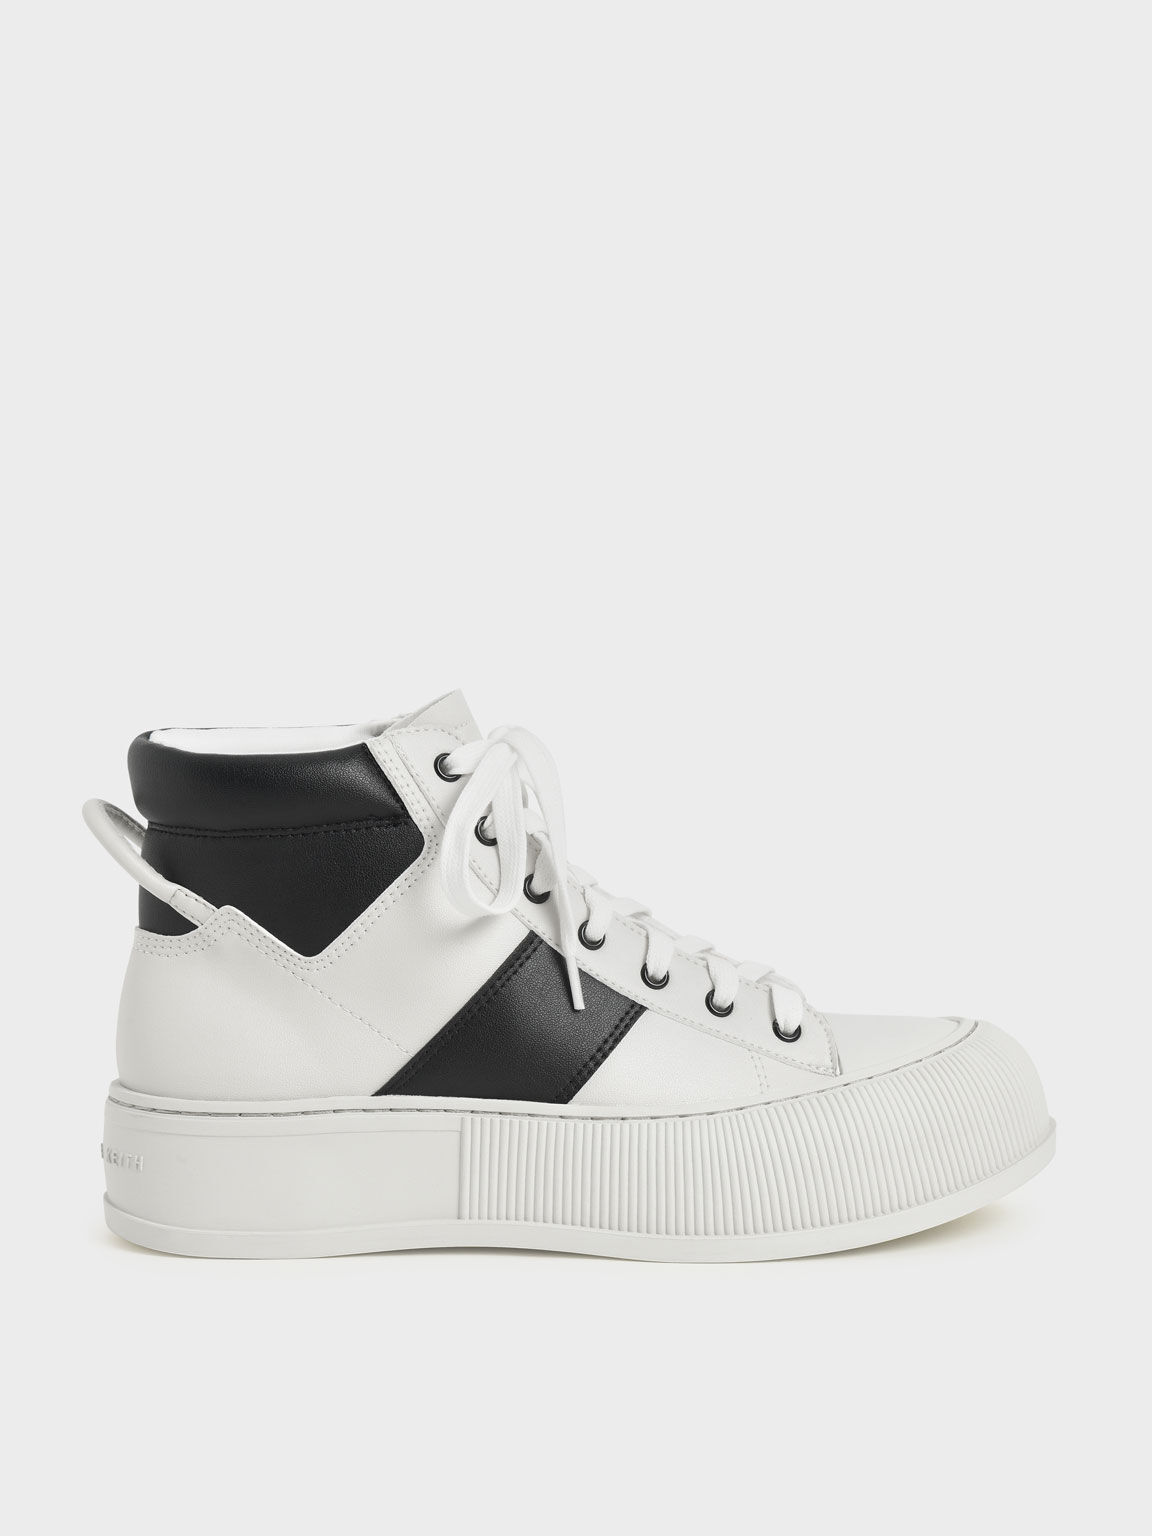 Two-Tone High-Top Sneakers, Black Textured, hi-res